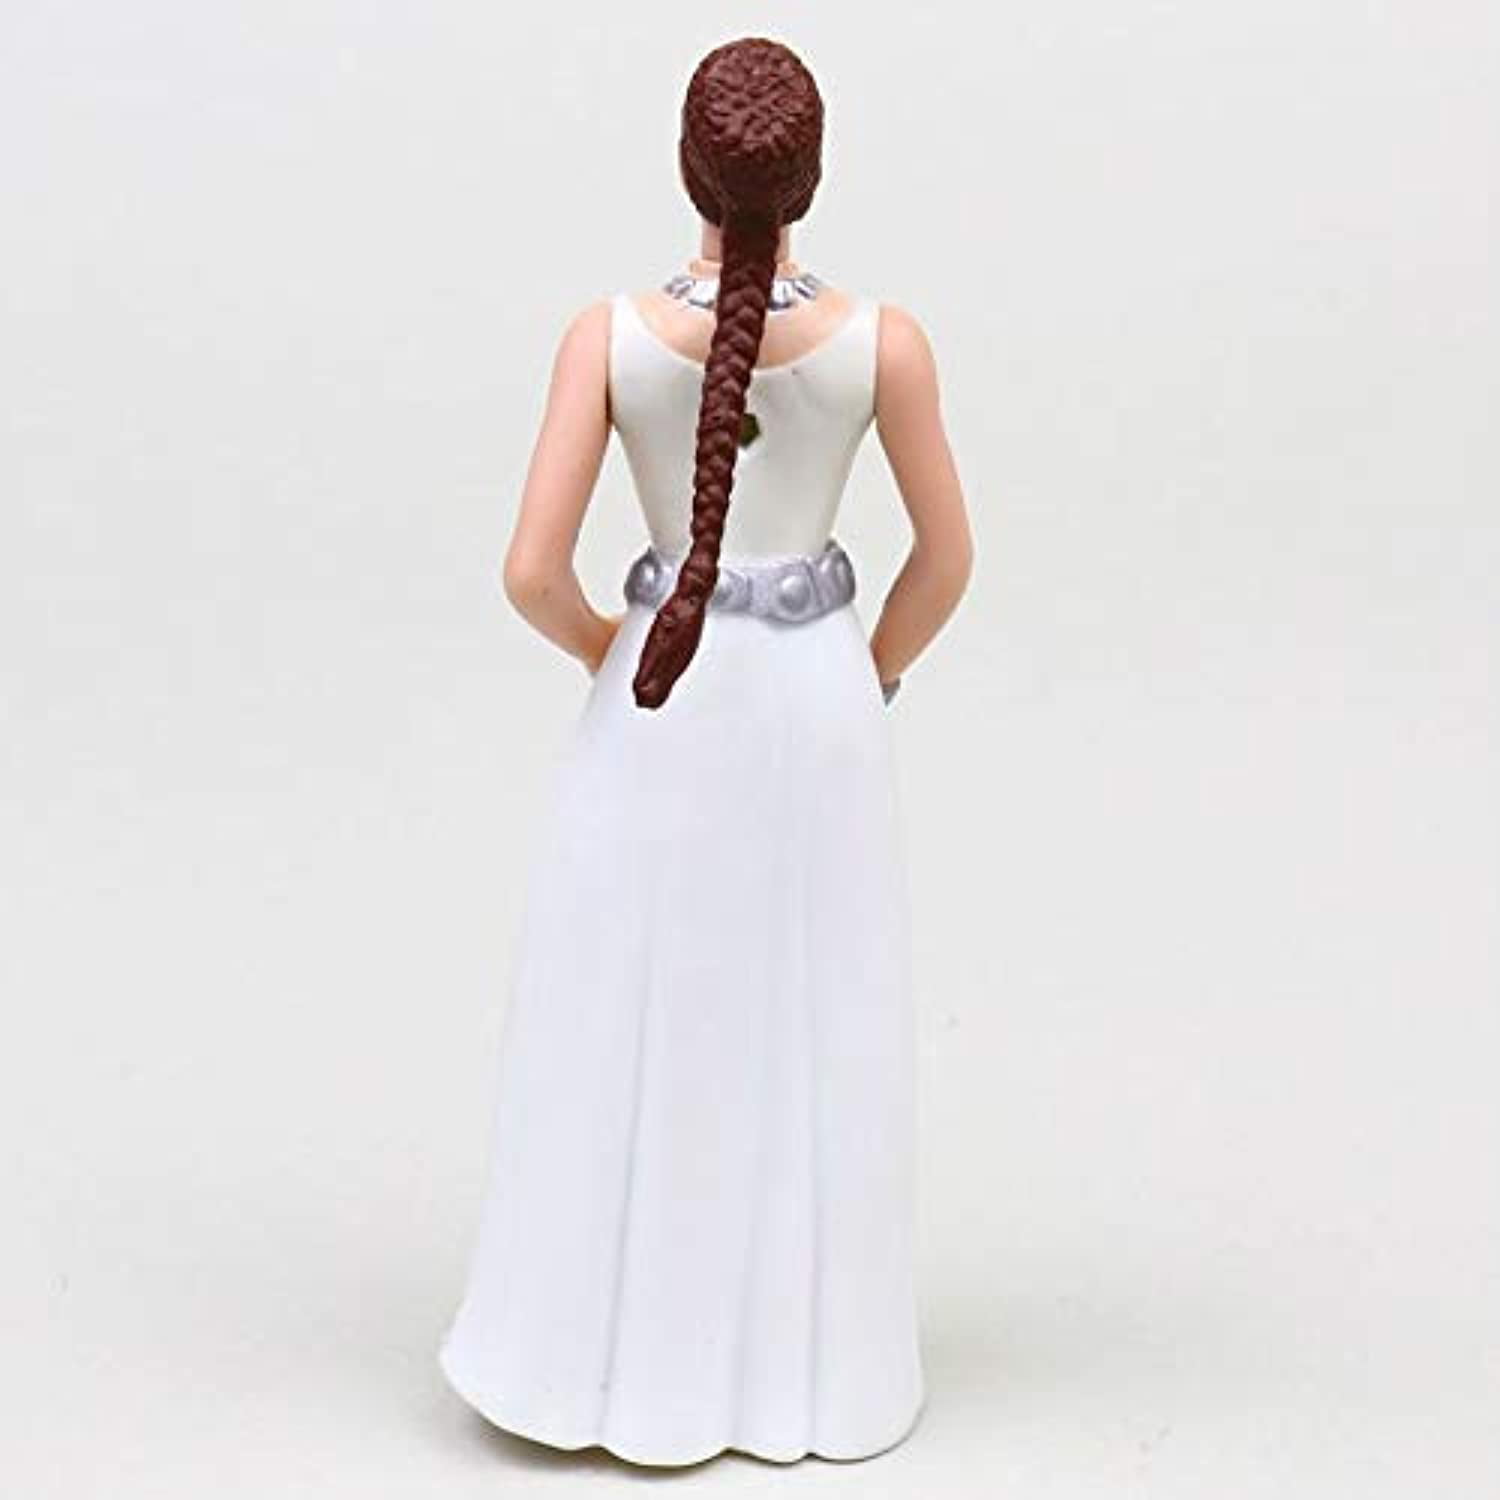 Star Wars: Princess Leia's A New Hope dress set to make a dizzying amount  at auction